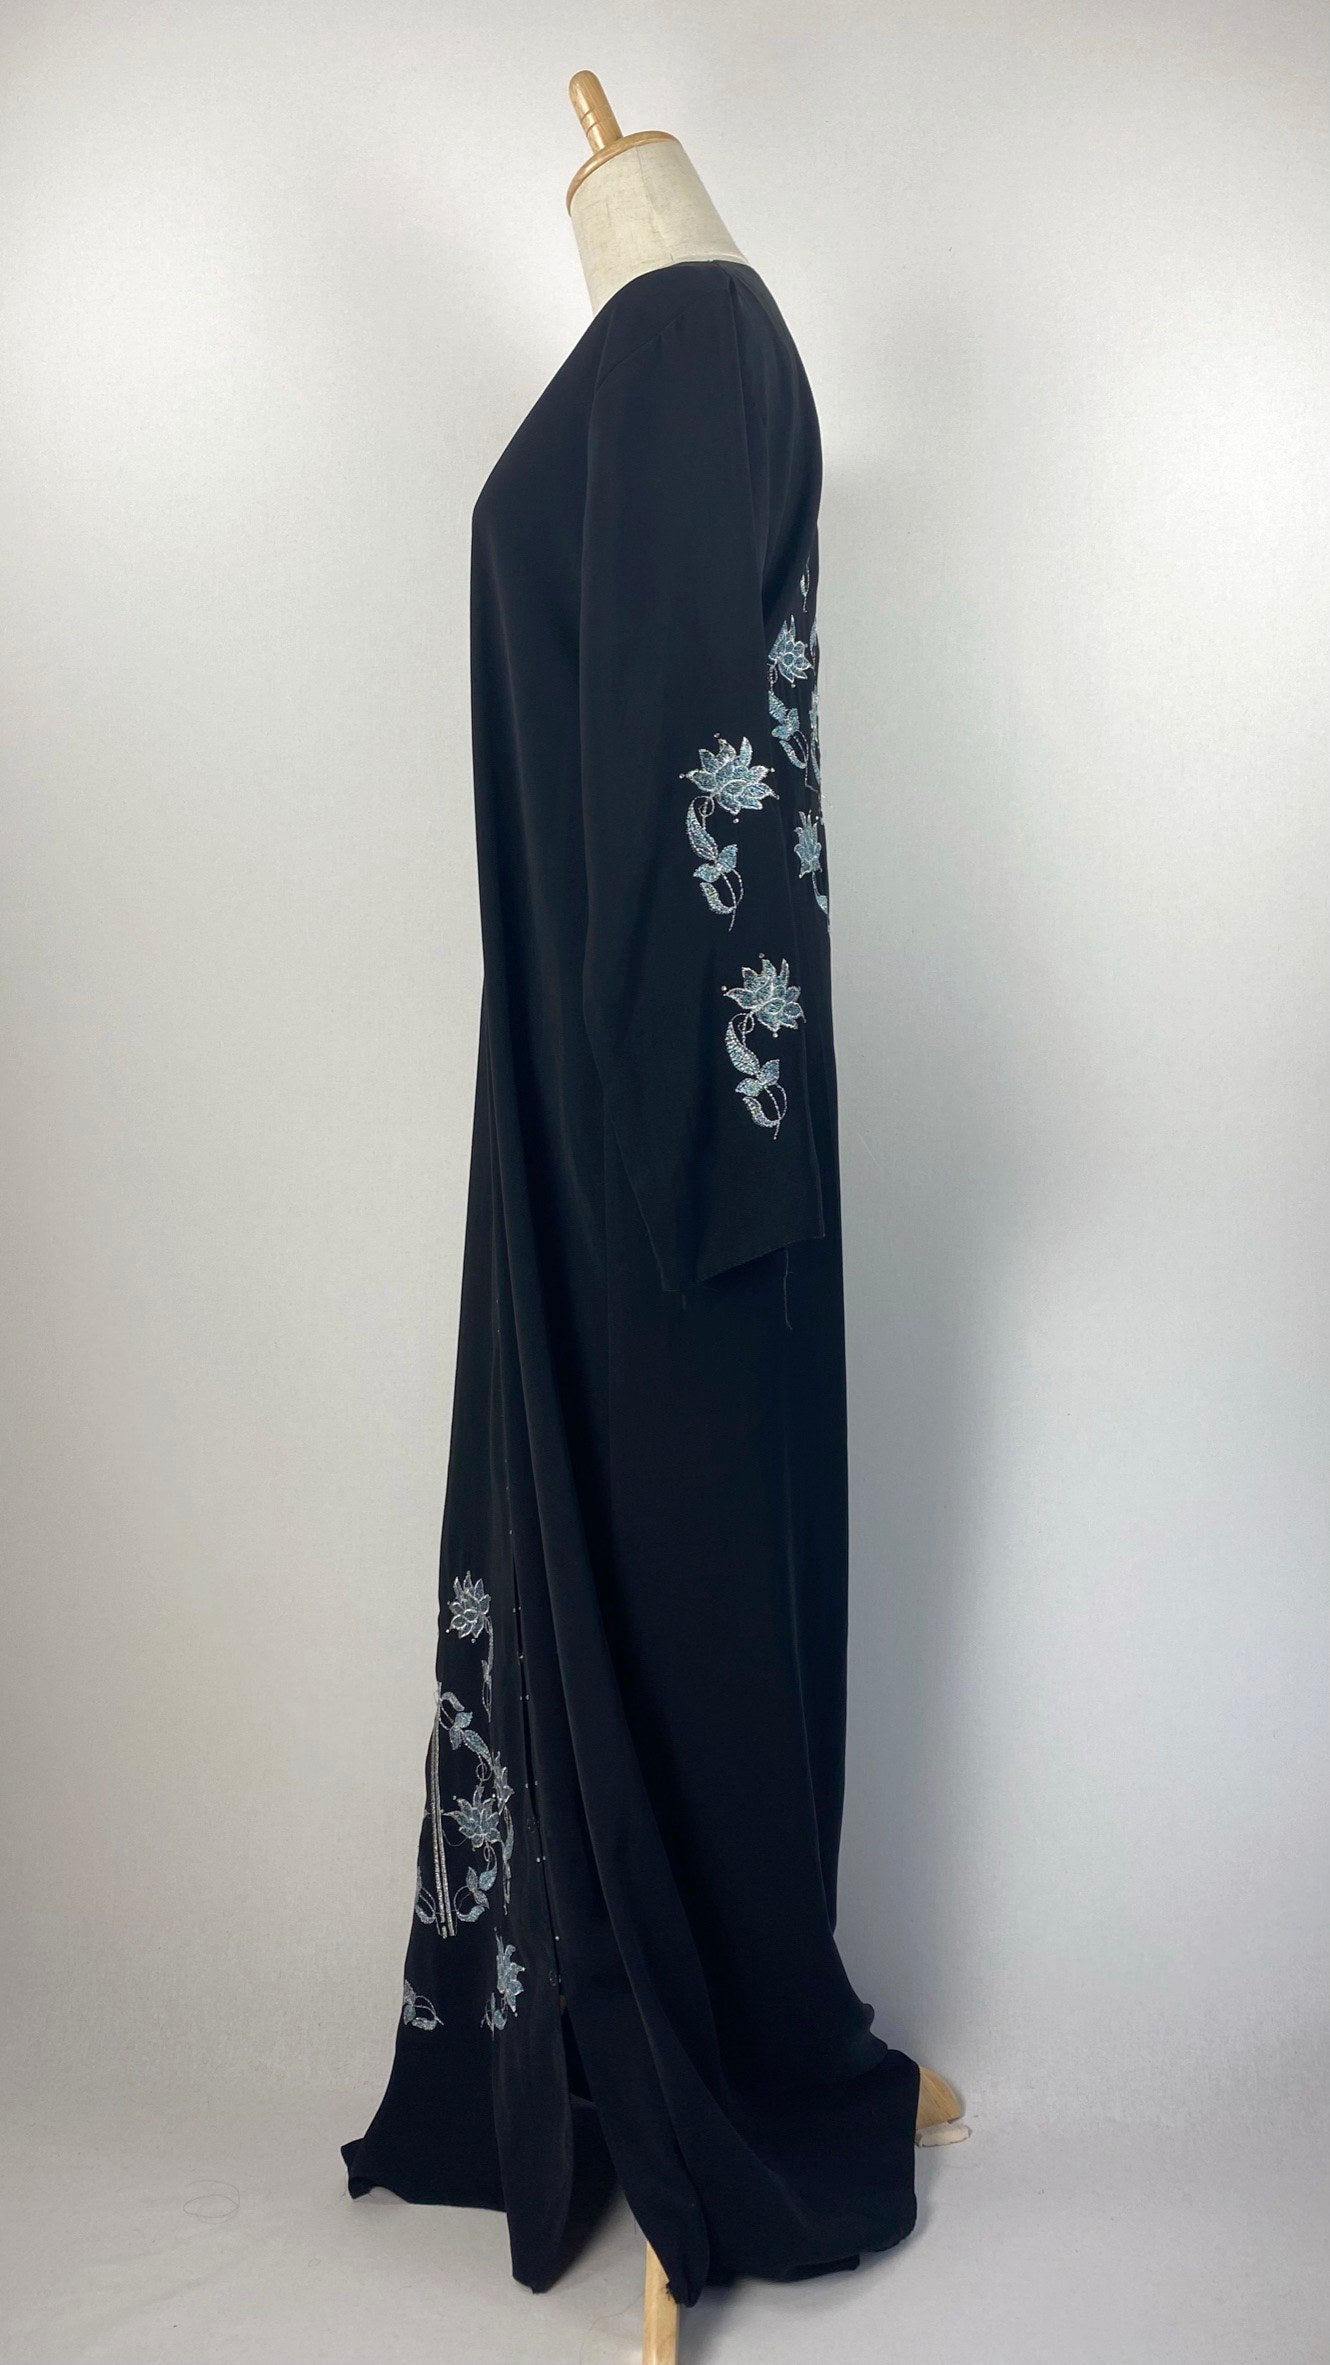 Long Sleeve Snap Button Abaya with Flowers, Black and Blue